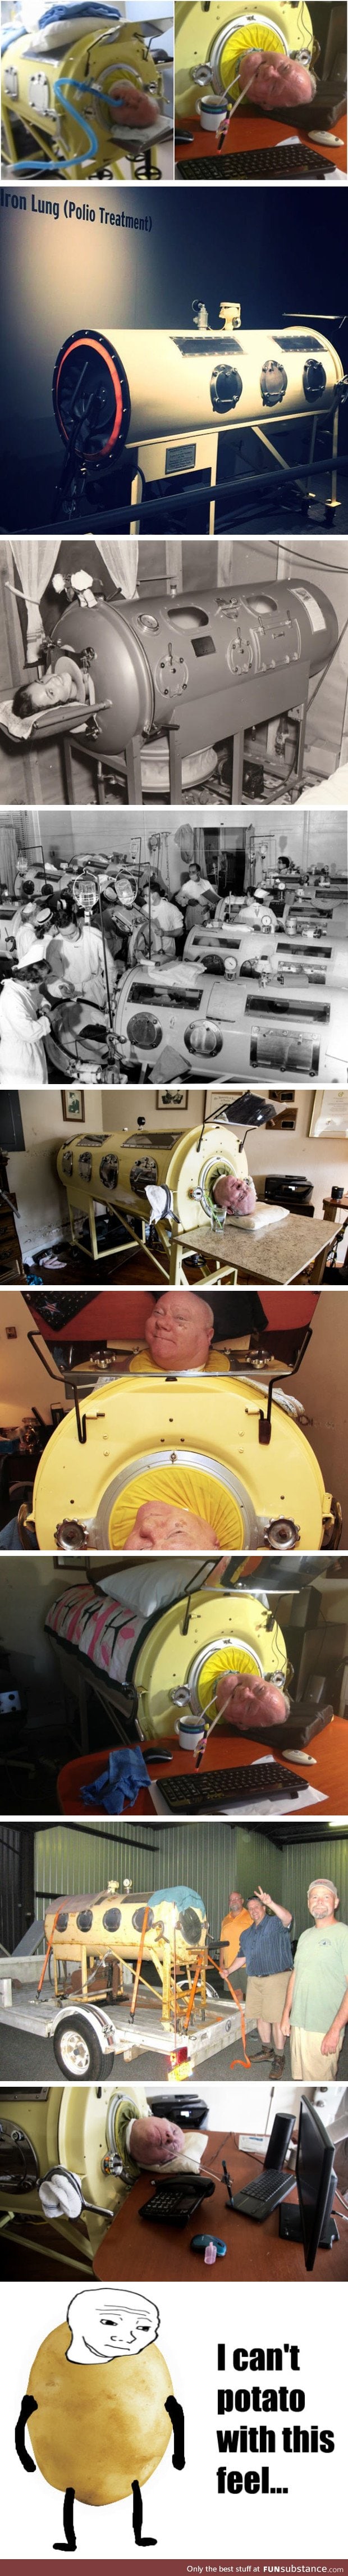 This polio survivor is one of the last people who is locked inside iron lungs